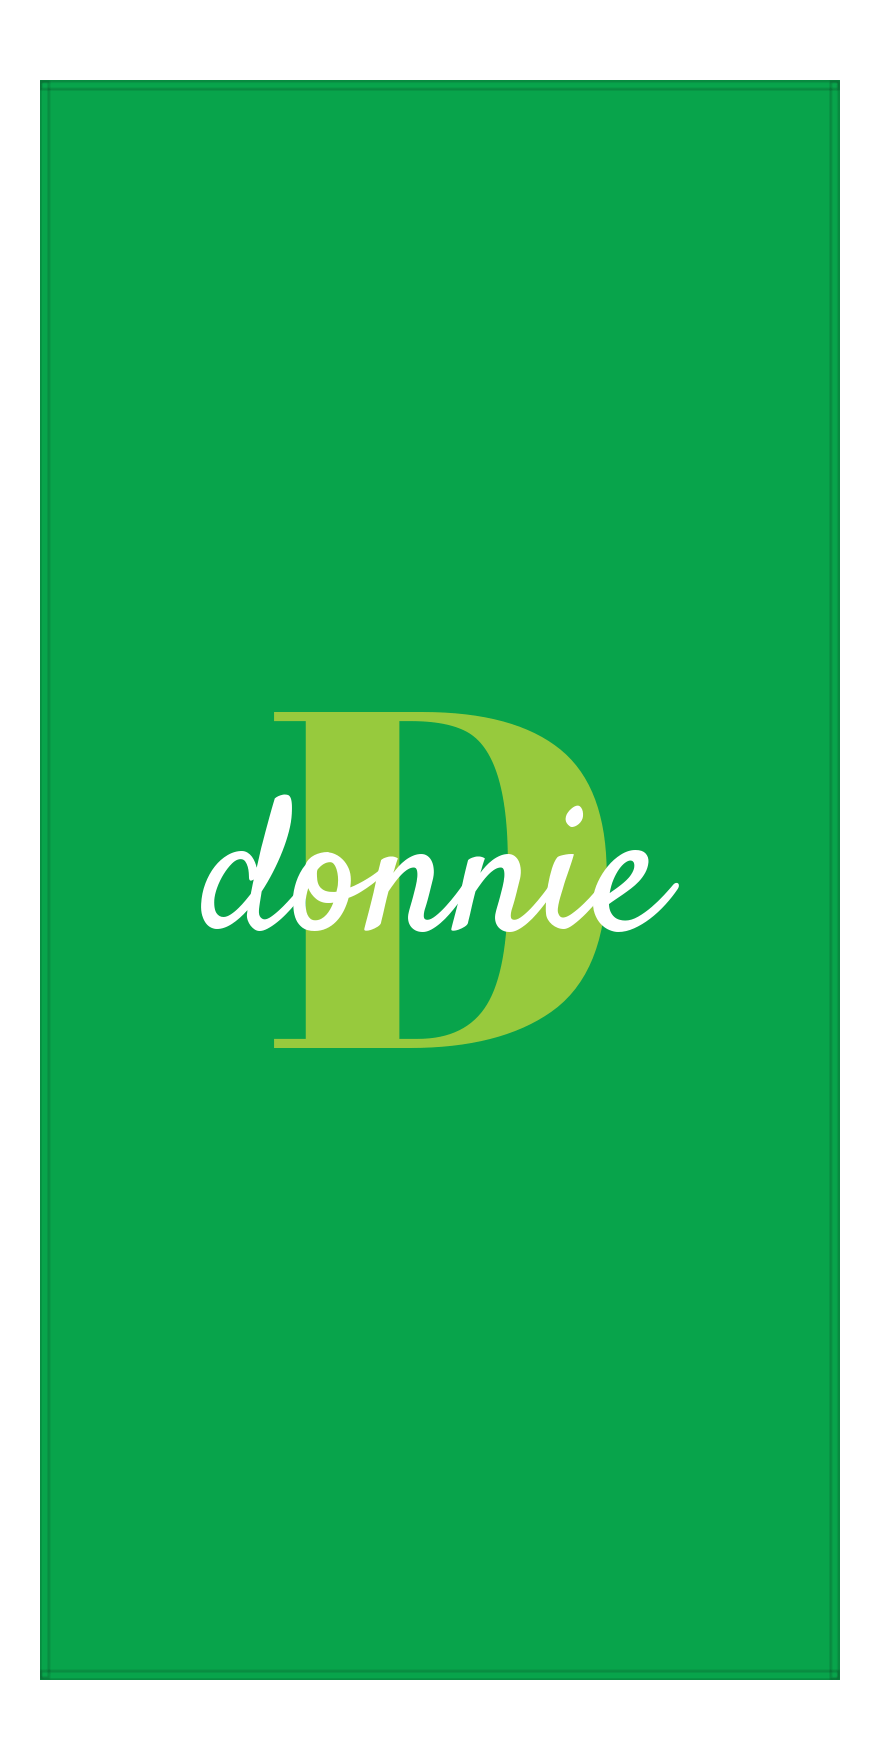 Personalized Solid Color Beach Towel - Vertical - Green Background - Name Over Initial - Front View